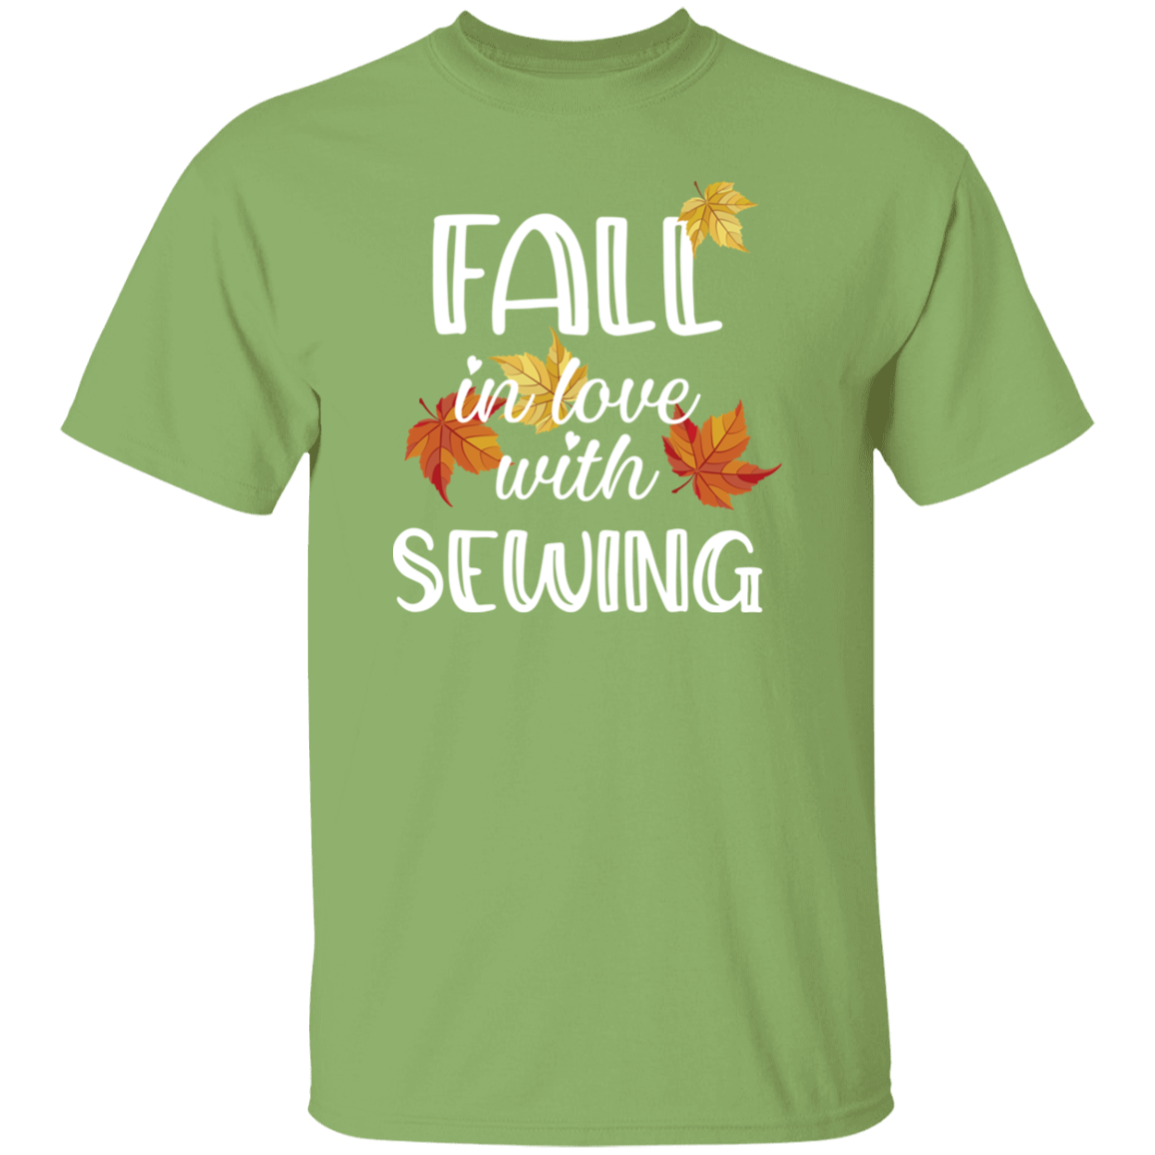 Fall in Love with Sewing T-Shirt